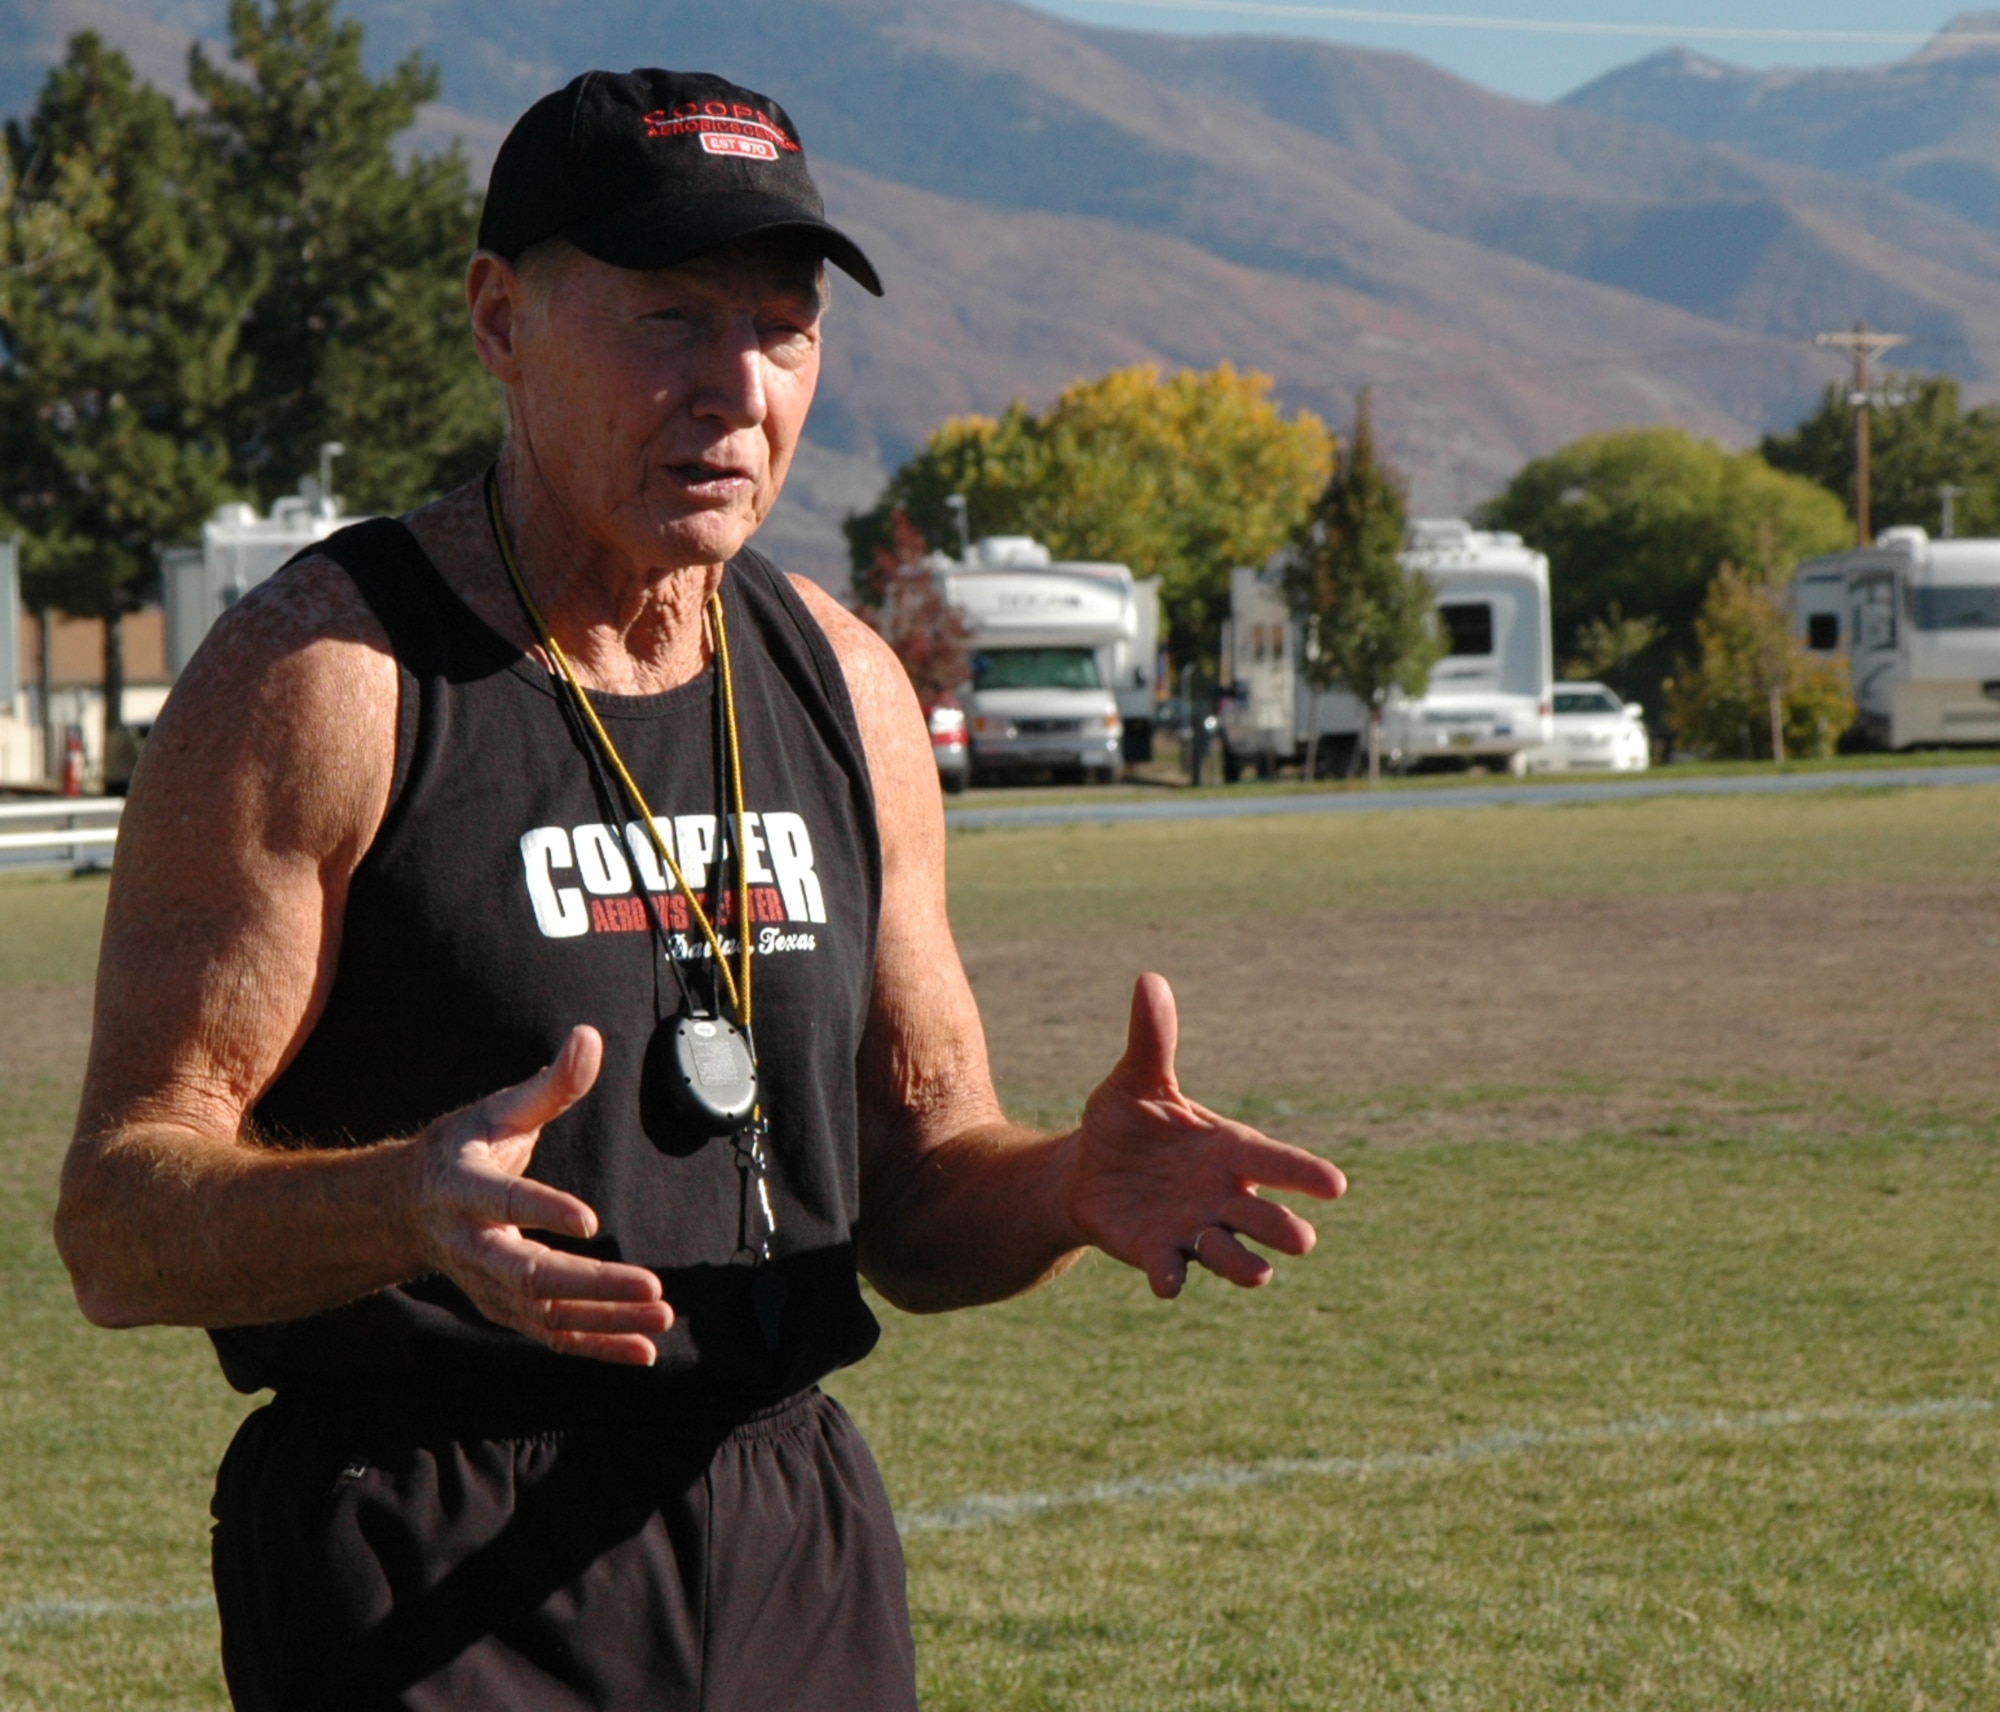 Roger Reynolds, director of contact relations at the Cooper institute, discusses proper form while running to a group of physical training leaders Oct. 24.